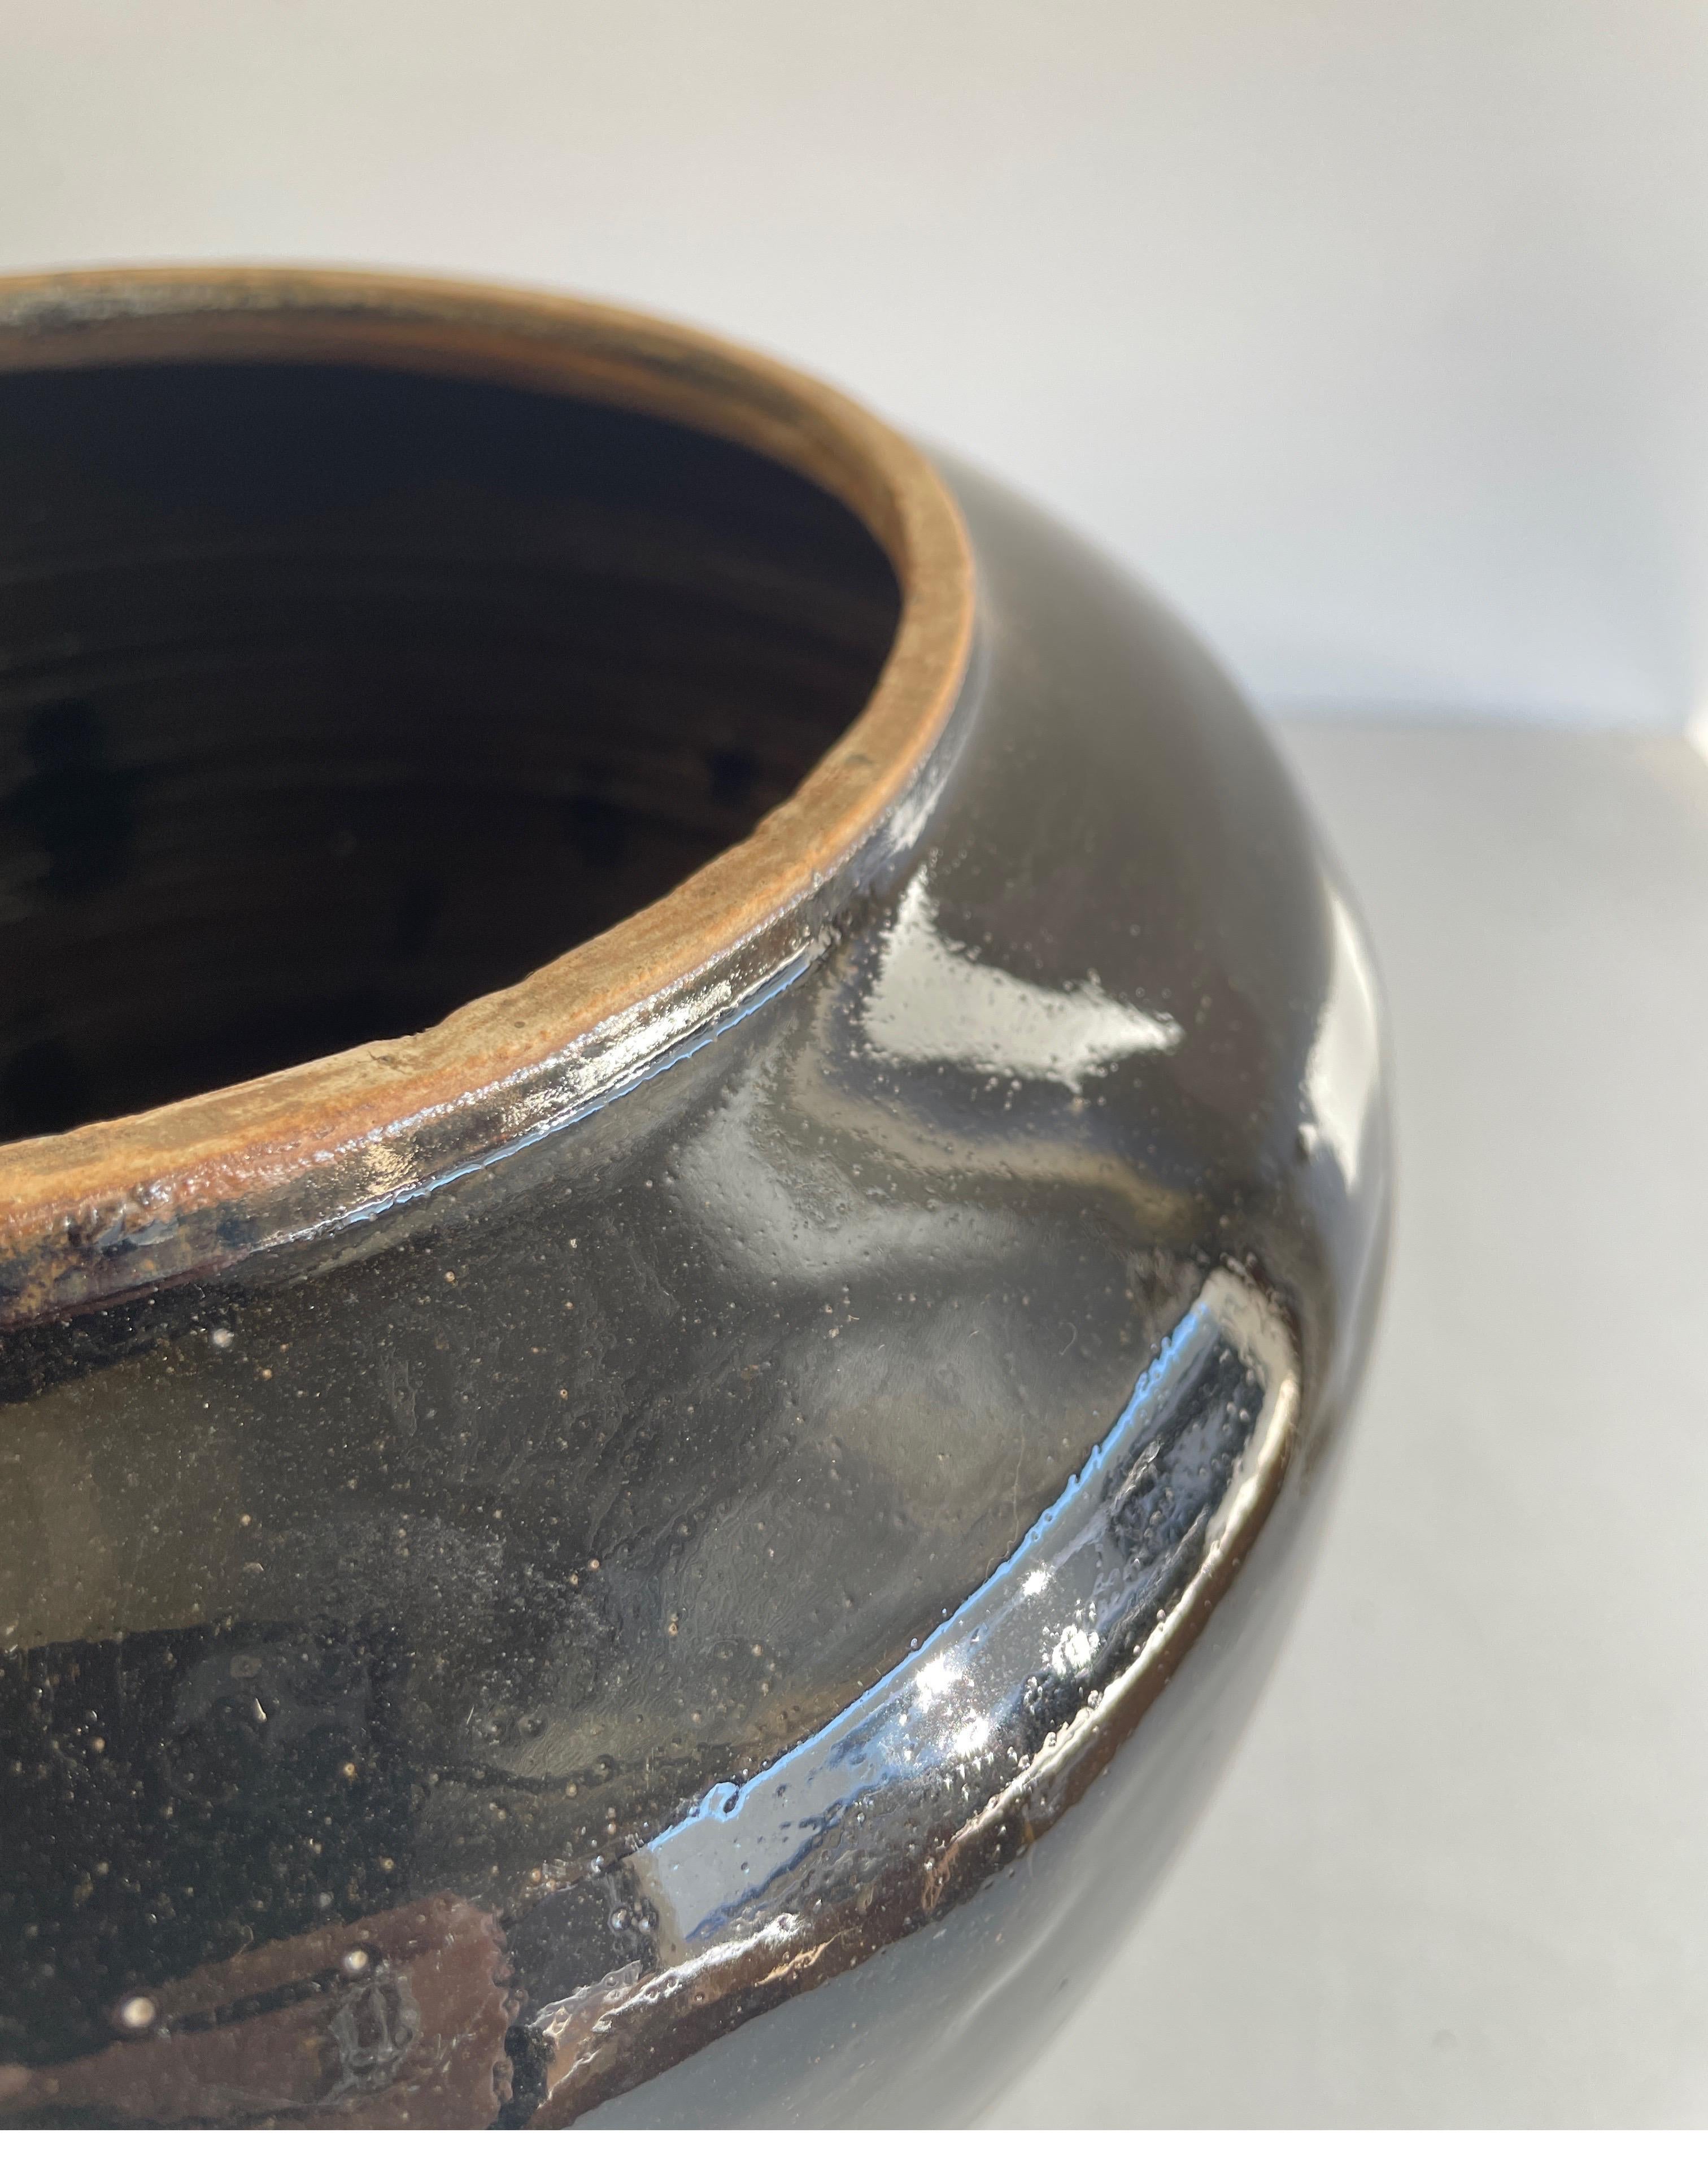 Vintage pottery beautiful and rich in character, this vintage oil pot adds just the right amount of texture + warmth where you need it. Stunning faded black/ brown unglazed finish with warm terra-cotta accents. Some have a more faded appearance than